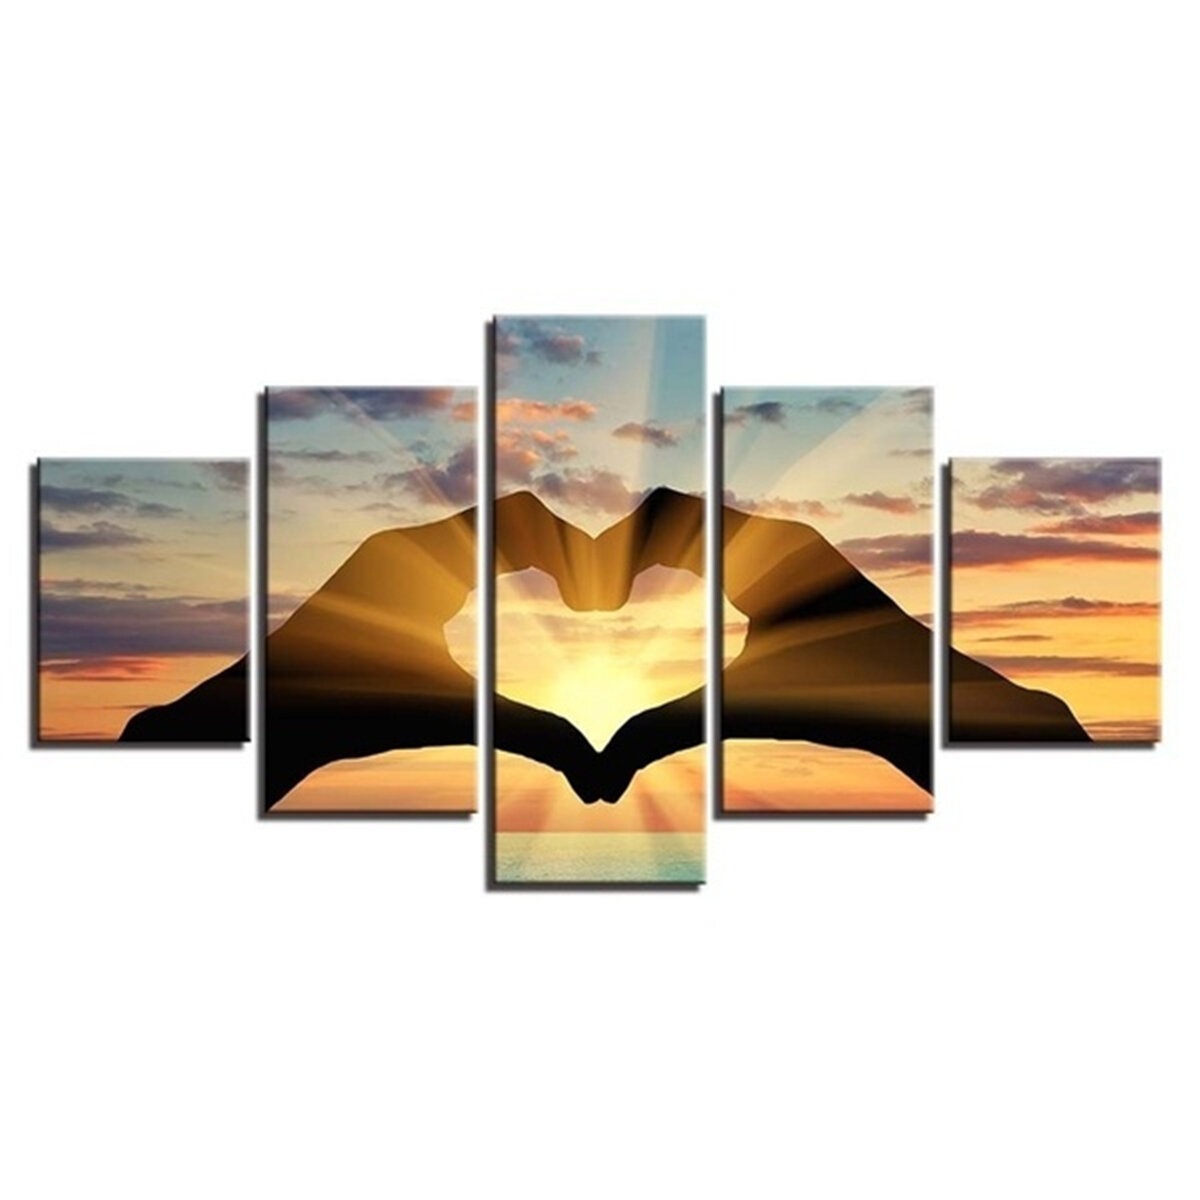 5 Pcs Wall Decorative Painting Couple Love Group Wall Decor Art Pictures Canvas Prints Home Office H